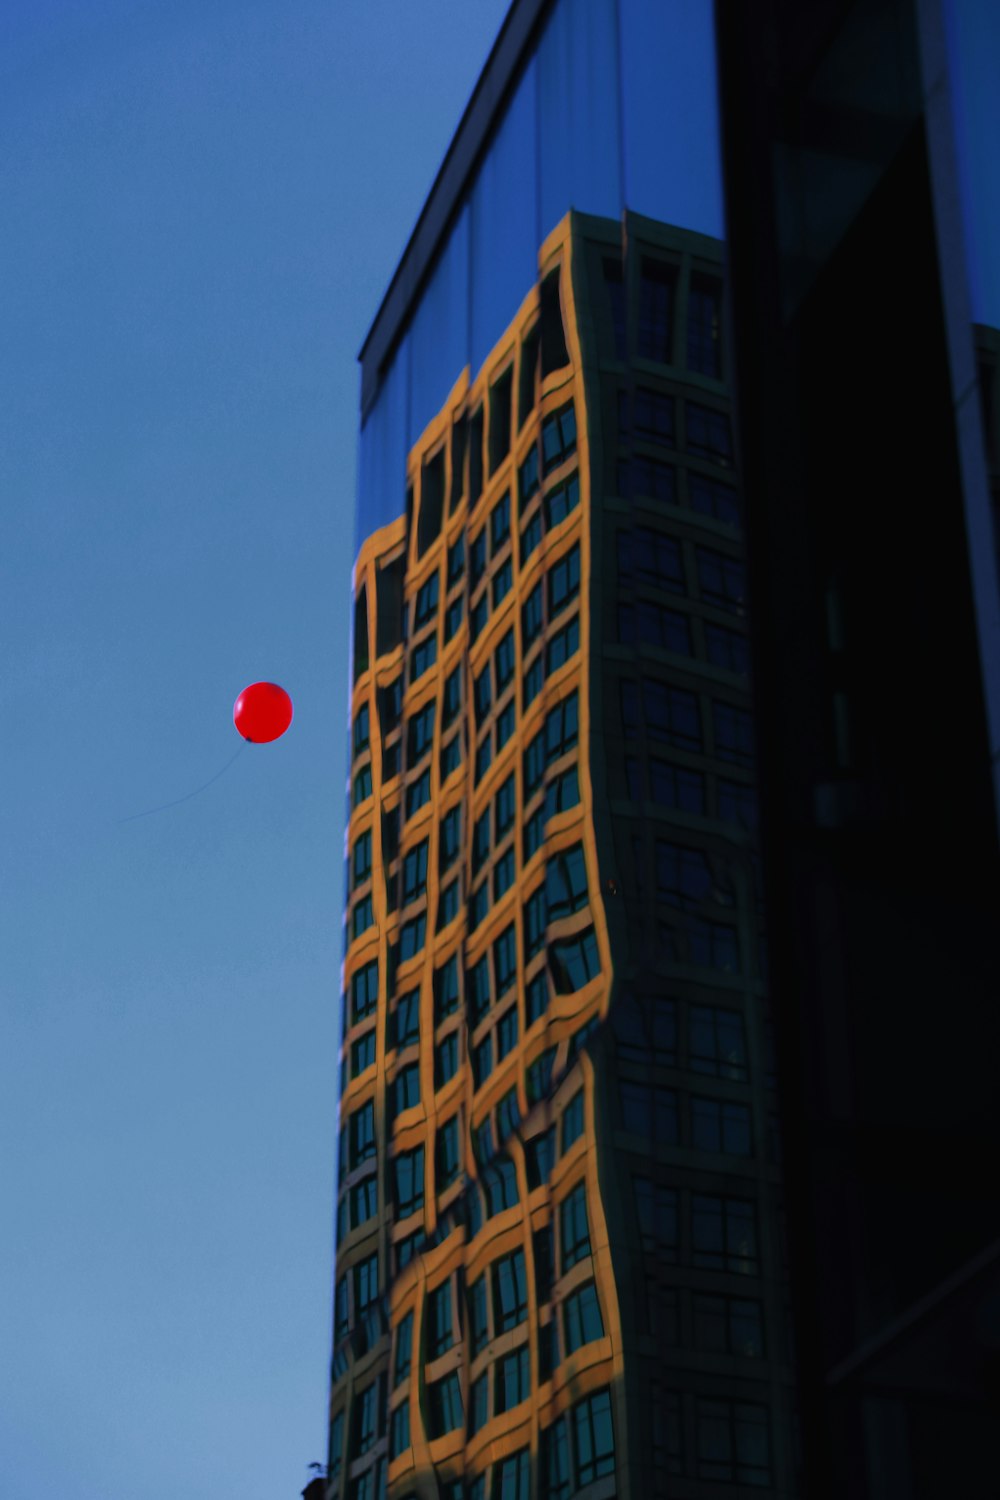 a red object flying in the air near a tall building